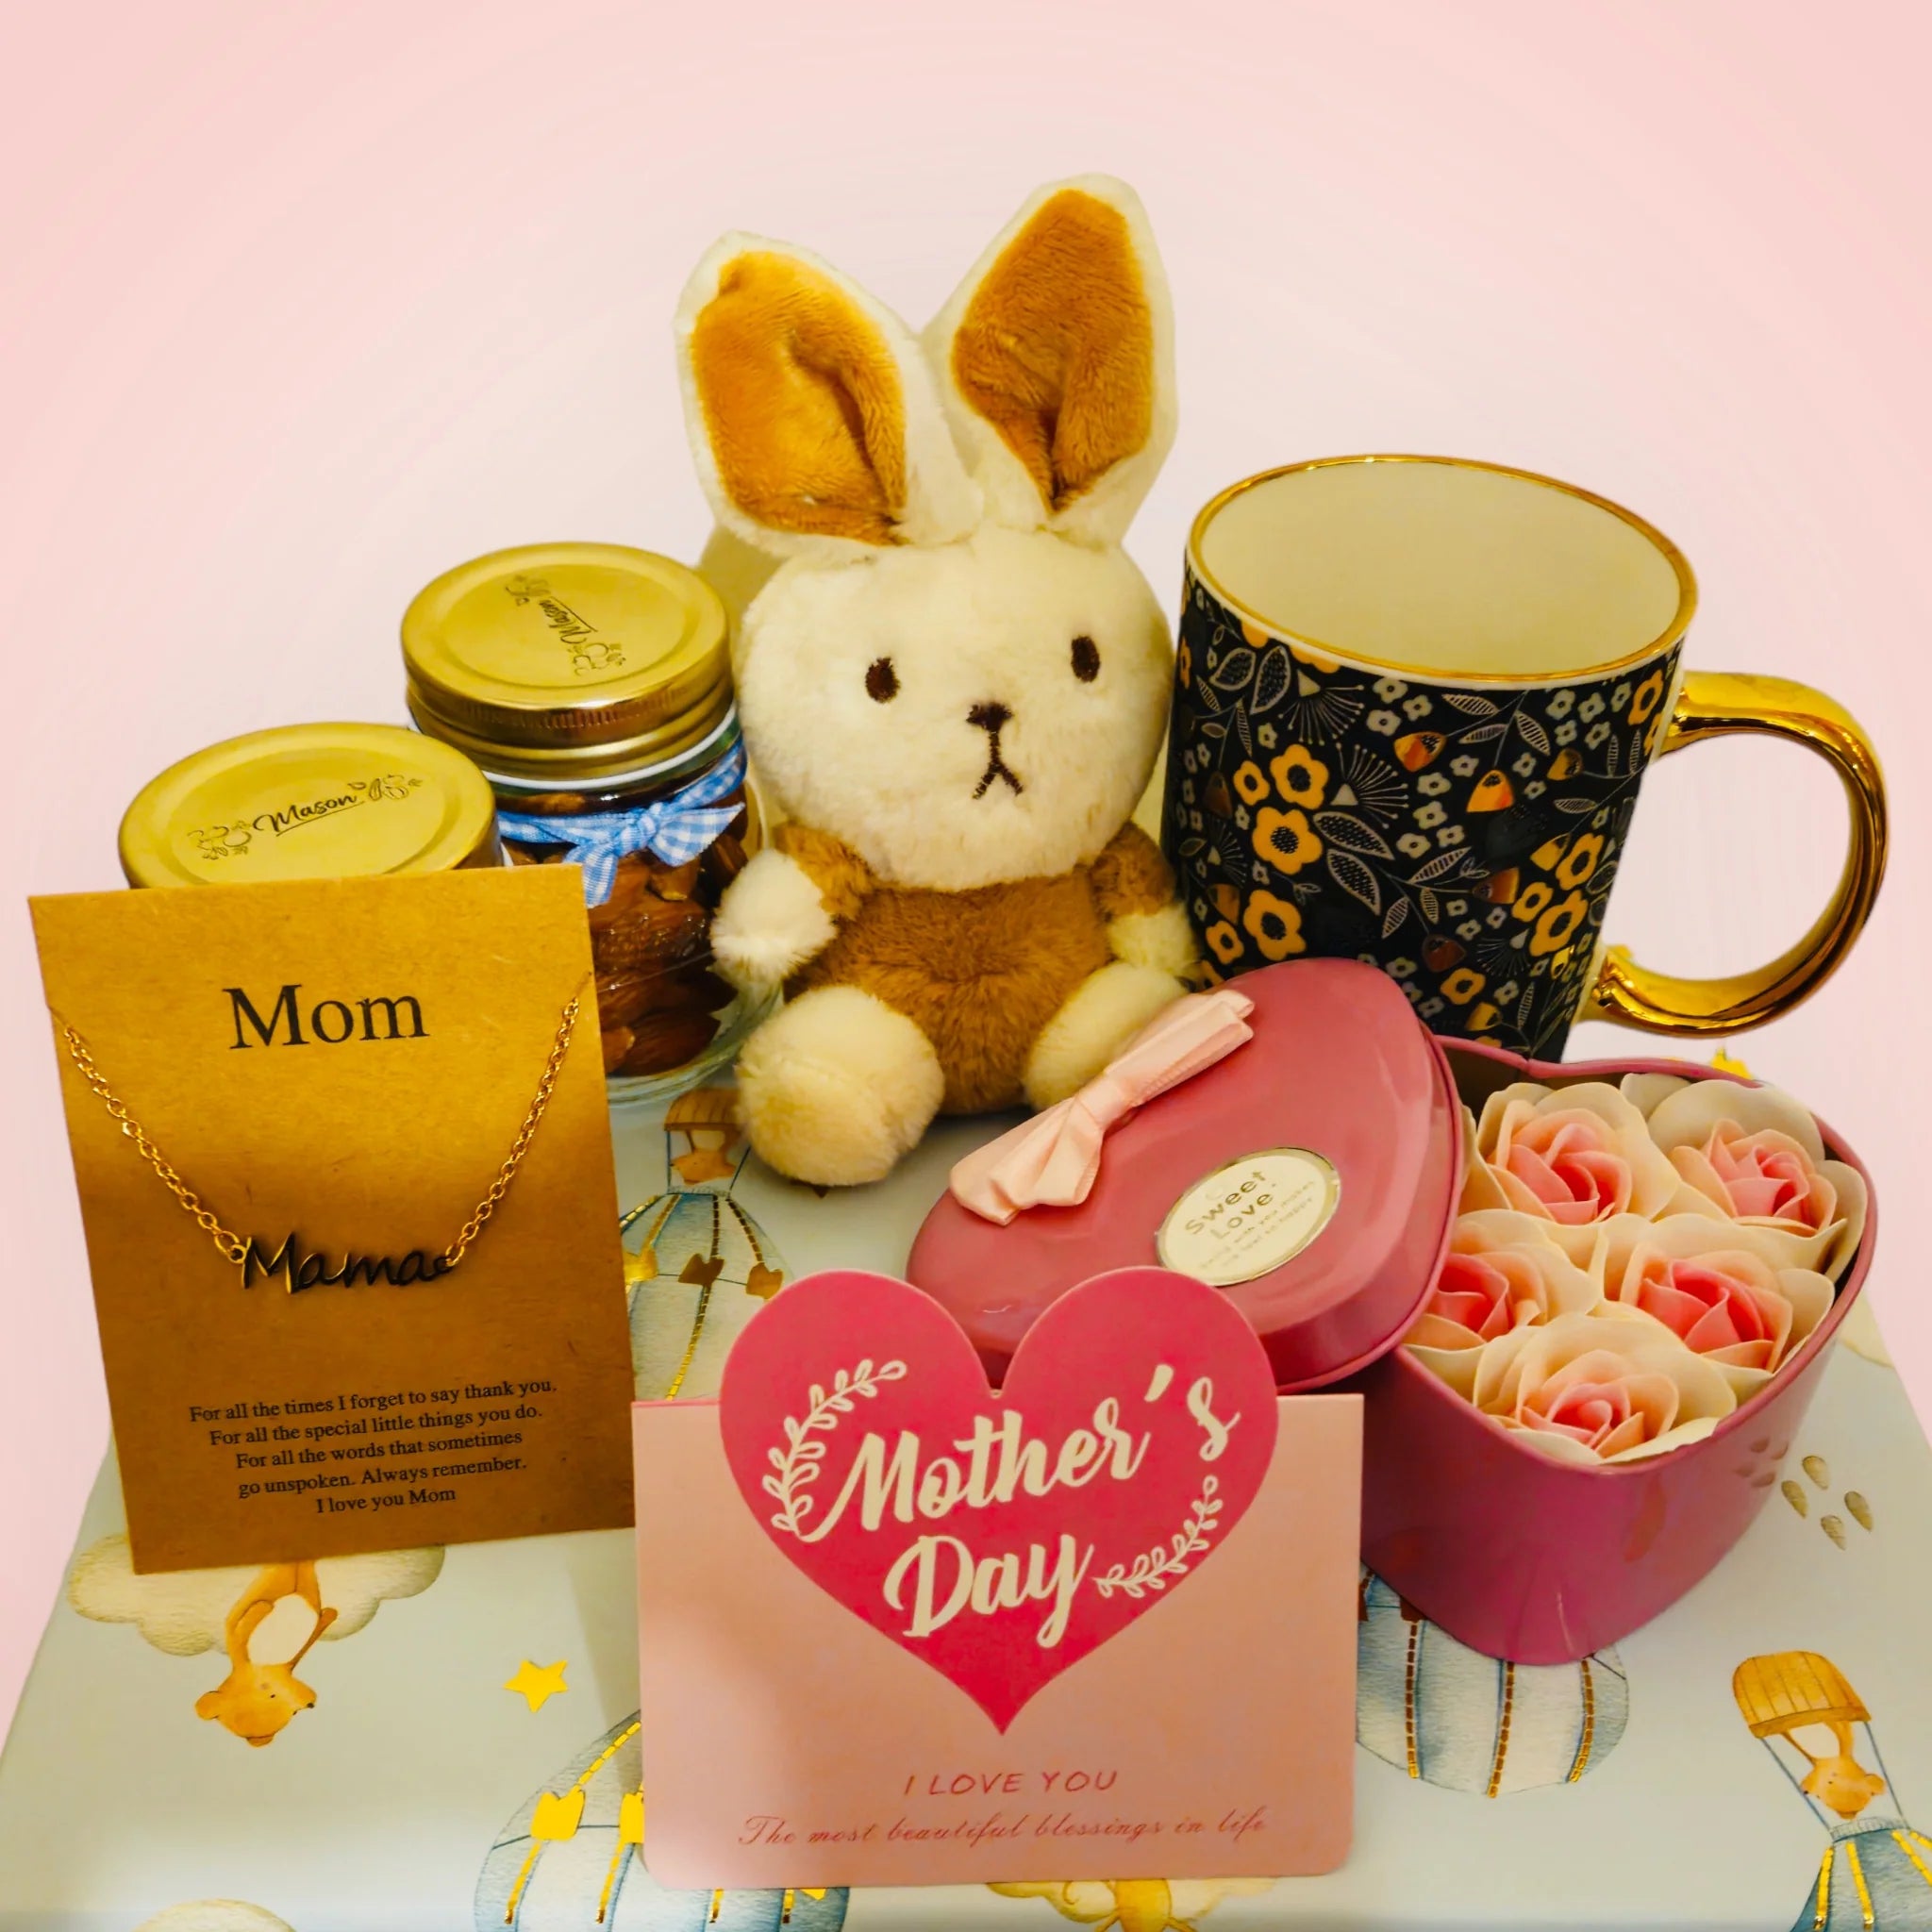 Mom's Day Delights Gift Box